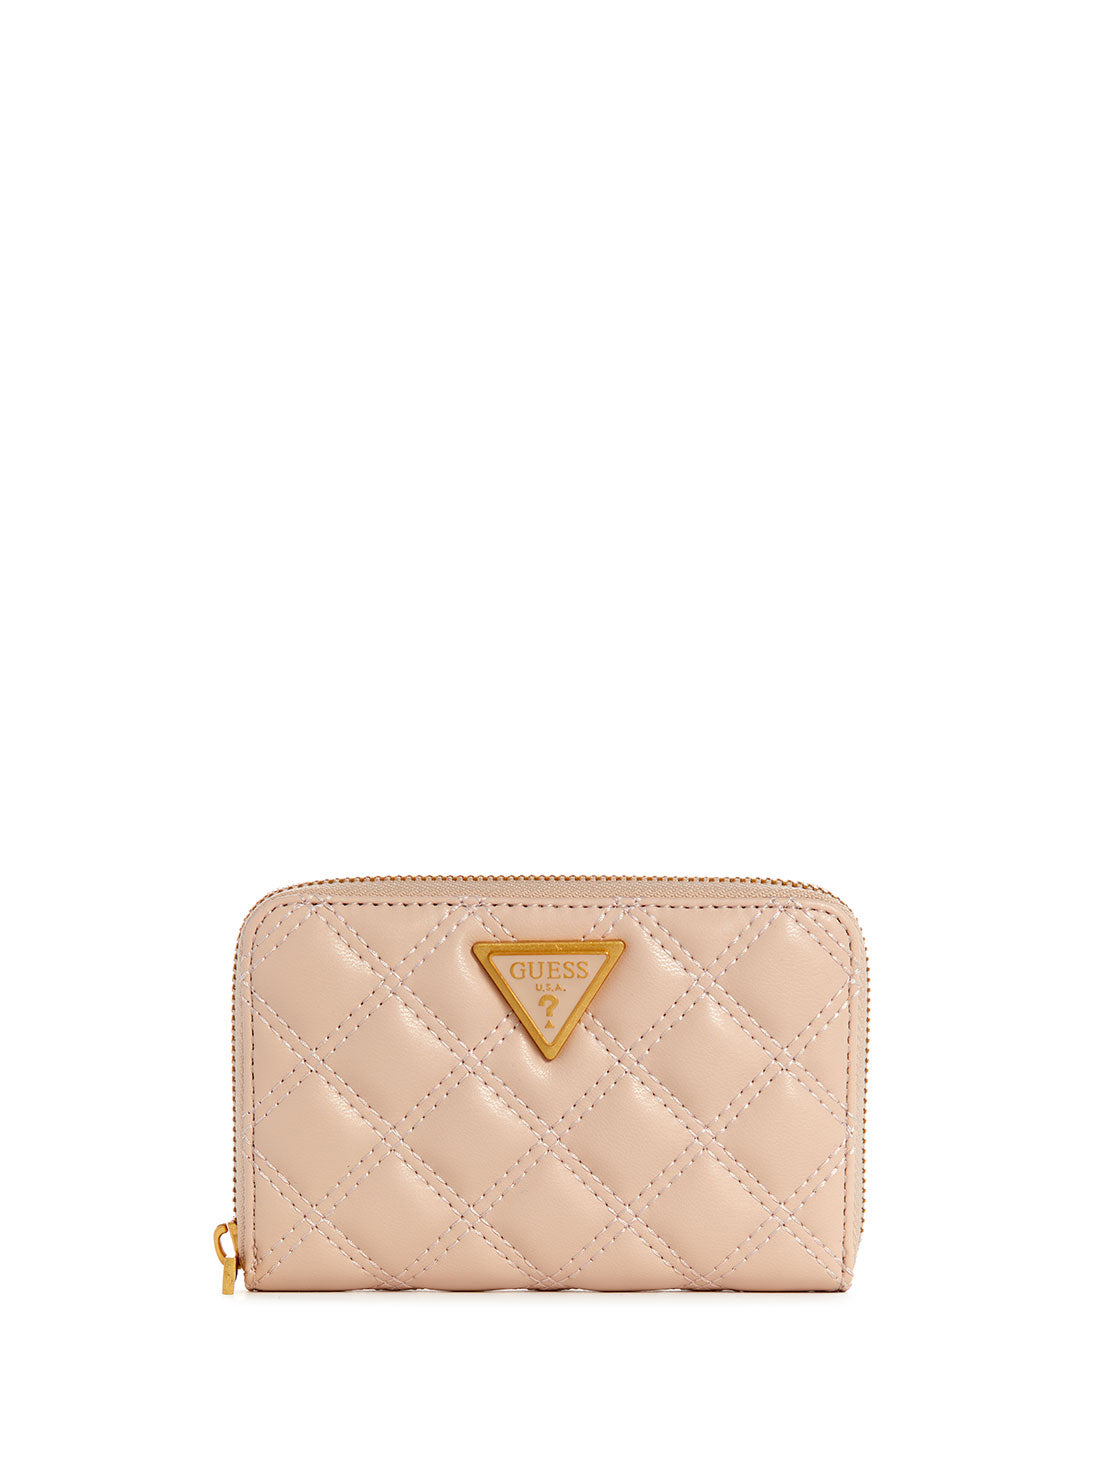 GUESS Light Beige Giully Medium Wallet front view